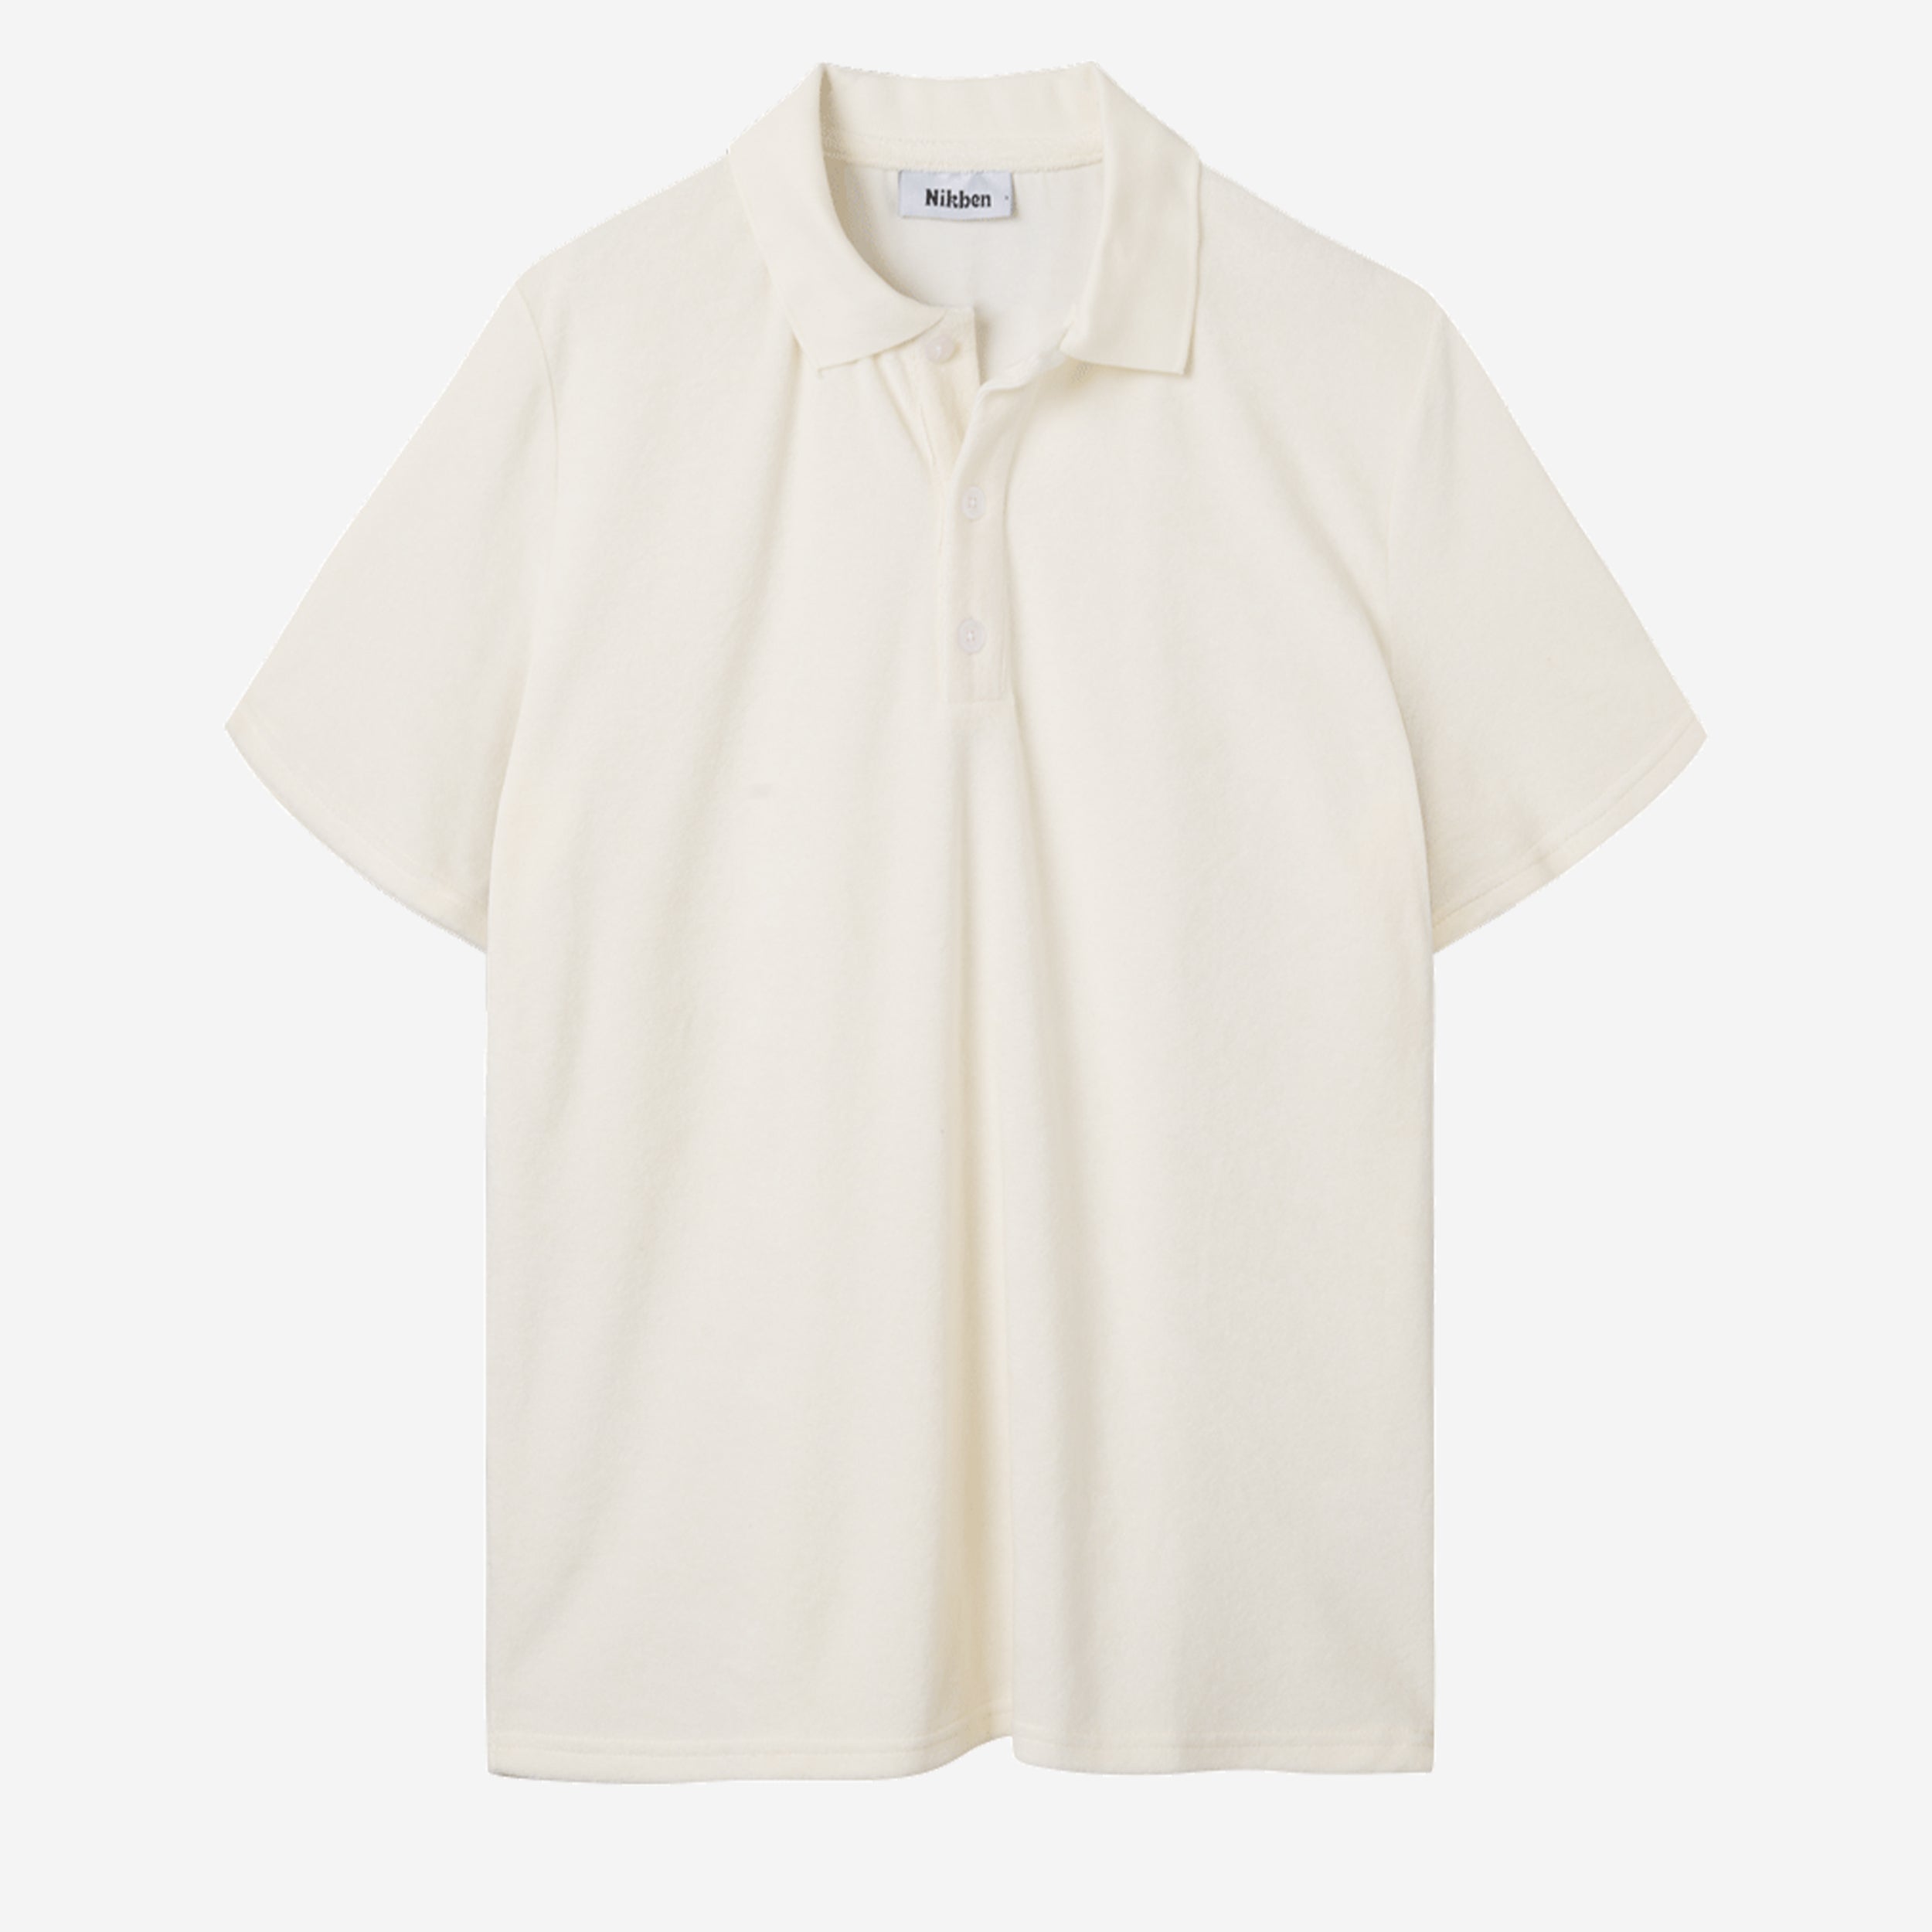 White short sleeve piké shirt in terry toweling fabric.